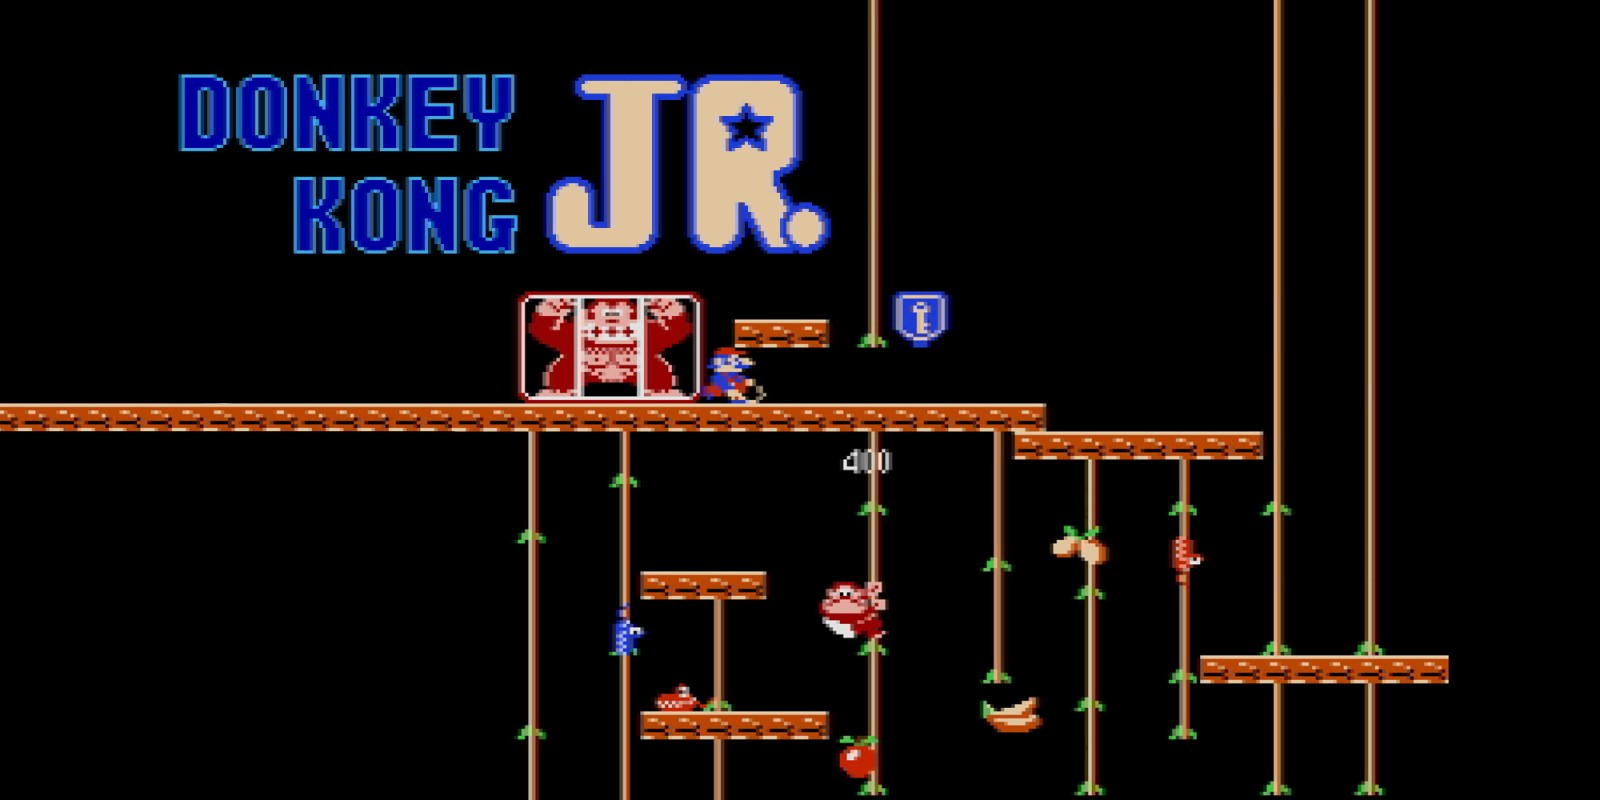 Donkey kong nes game over